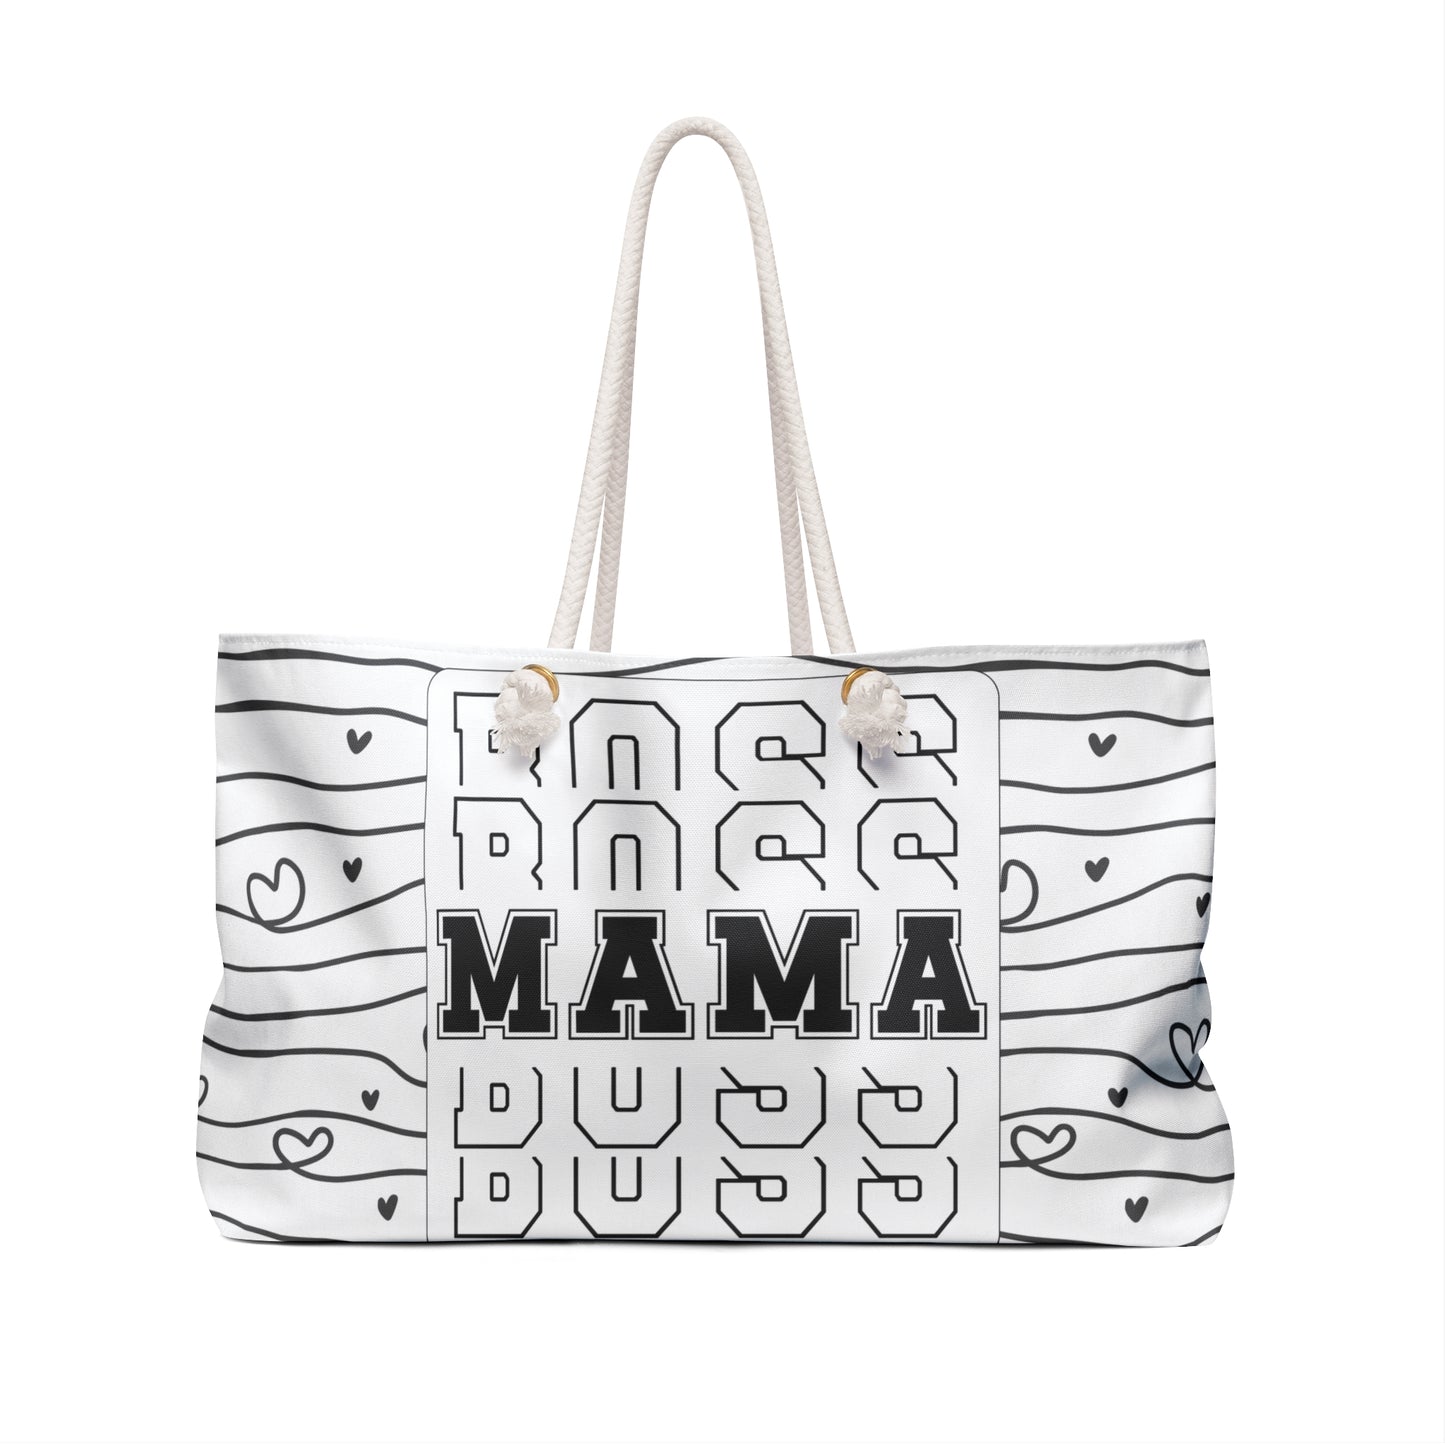 Personalized spacious Weekender Bag, Mother's Day, flower designs, Gifts for mom's day, custom mama bag (mama boss)